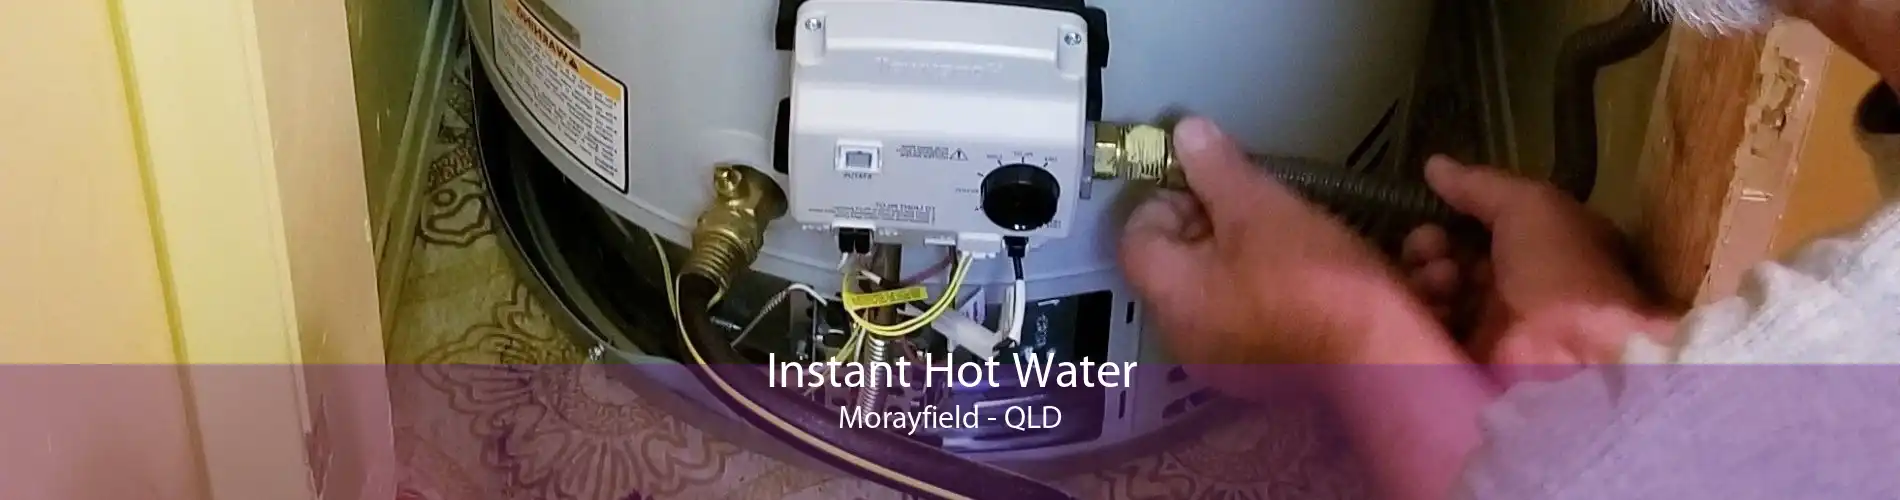 Instant Hot Water Morayfield - QLD